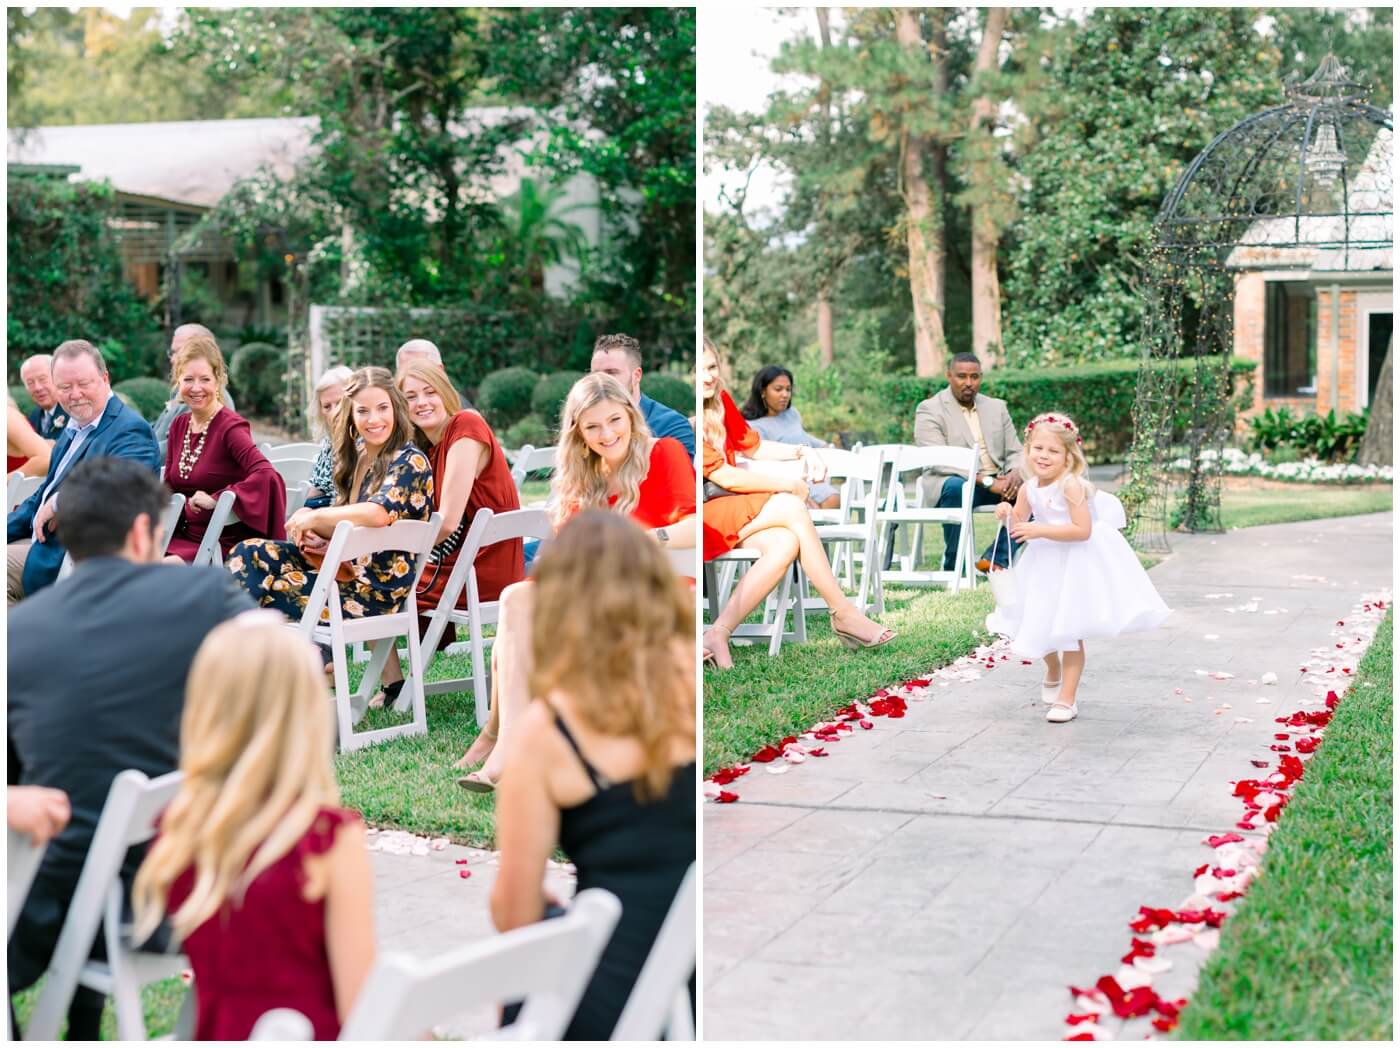 the guests smile as the flowergirl walks down the aisle